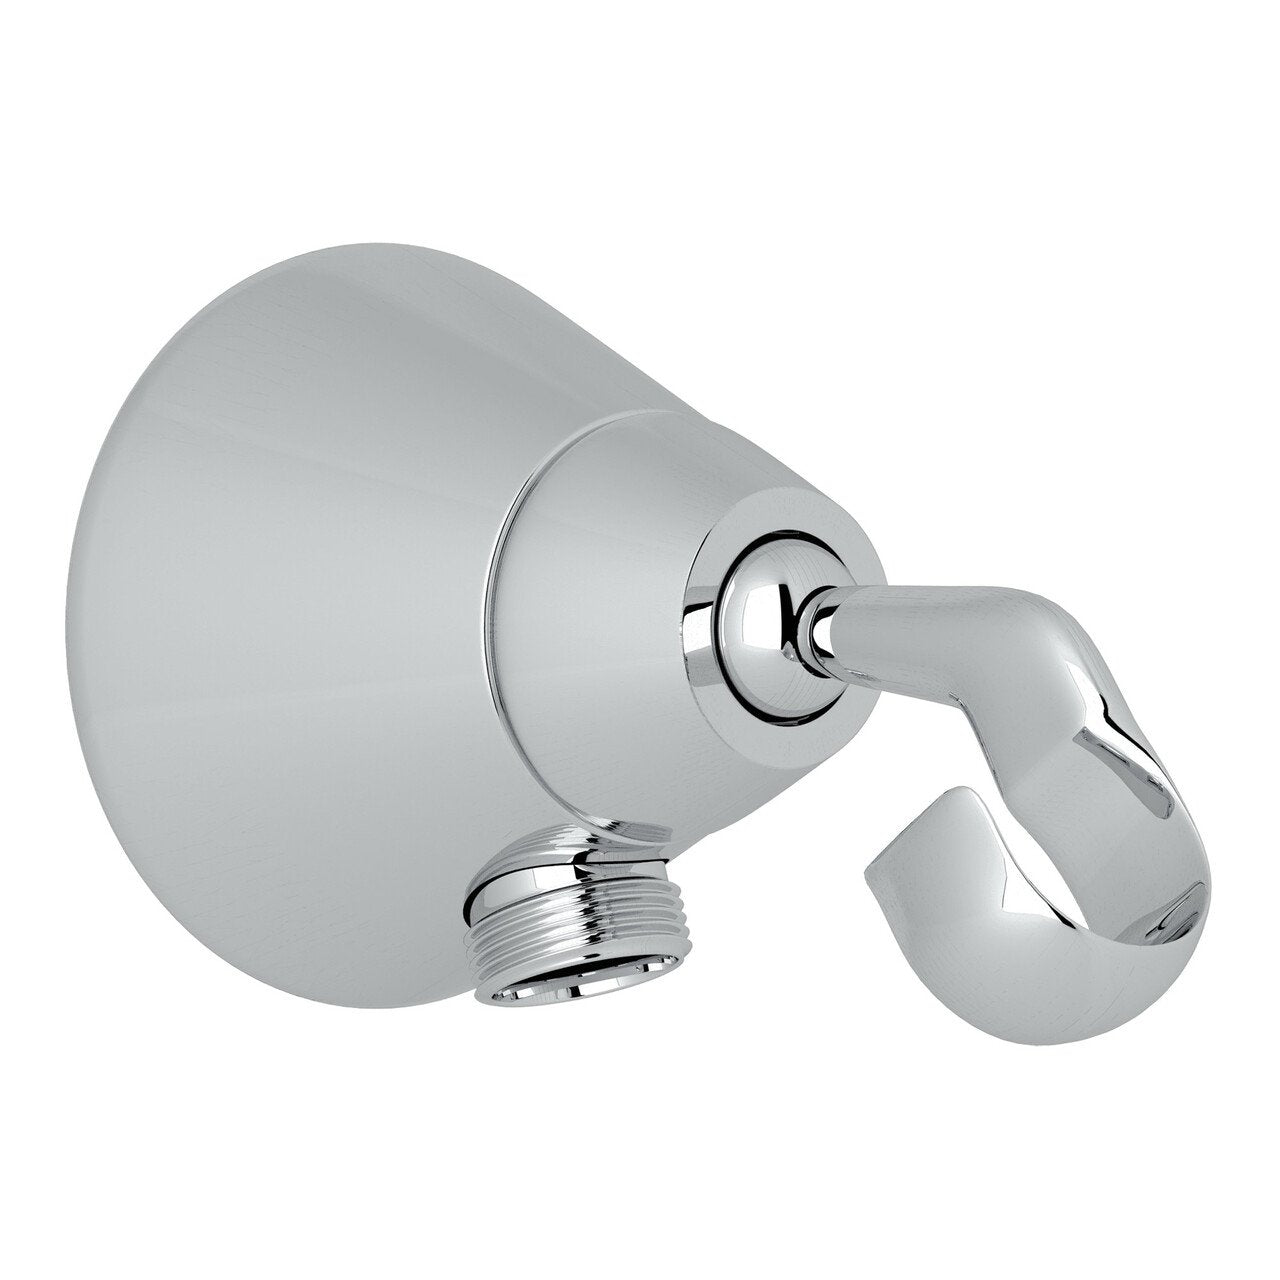 ROHL Handshower Outlet and Handshower Holder - BNGBath